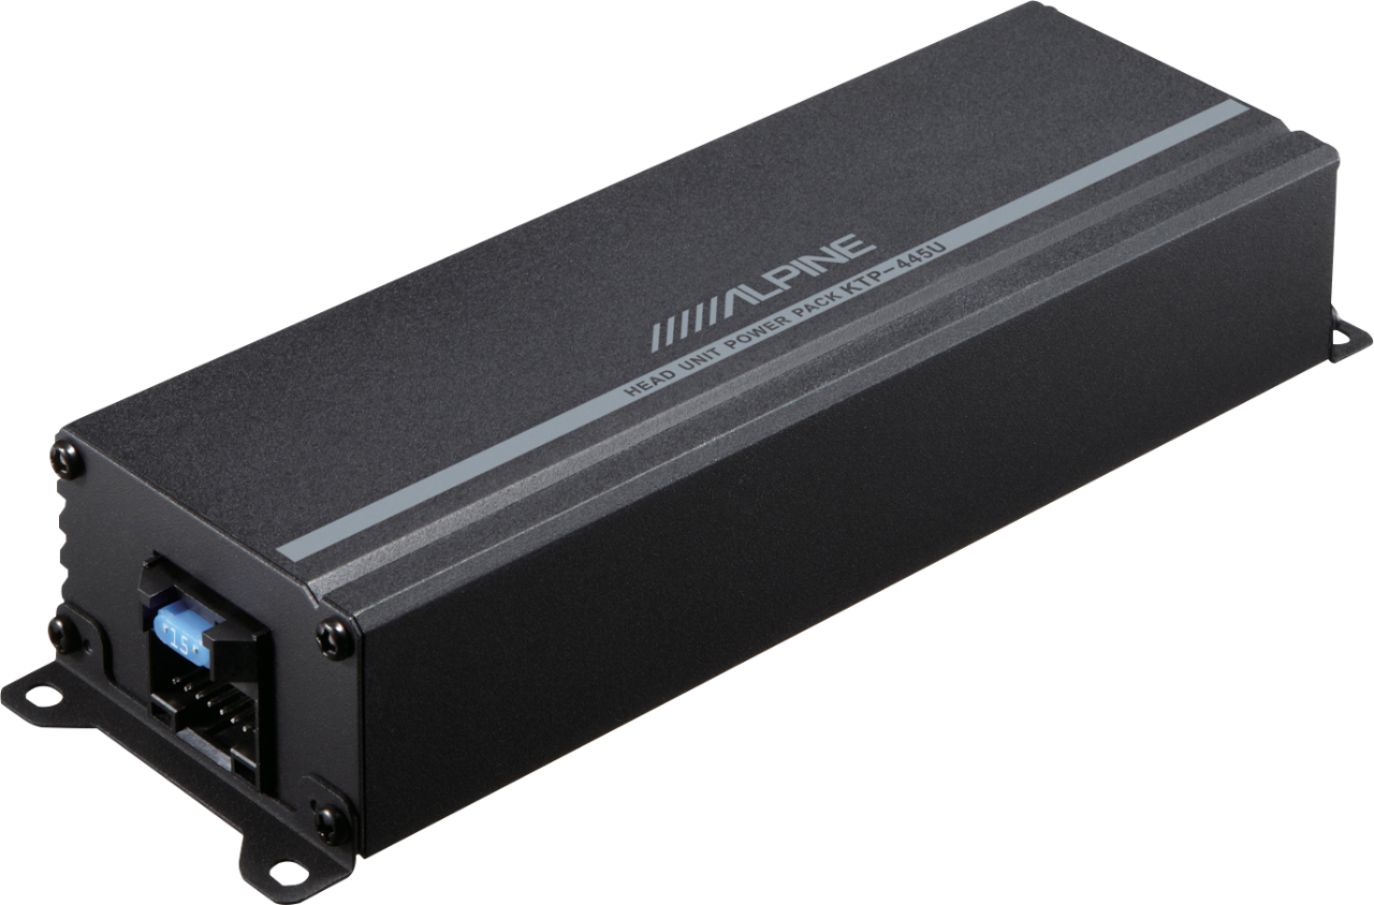 Angle View: Alpine - Power Pack 180W Class D Bridgeable Multichannel Amplifier with High-Pass Filter - Black